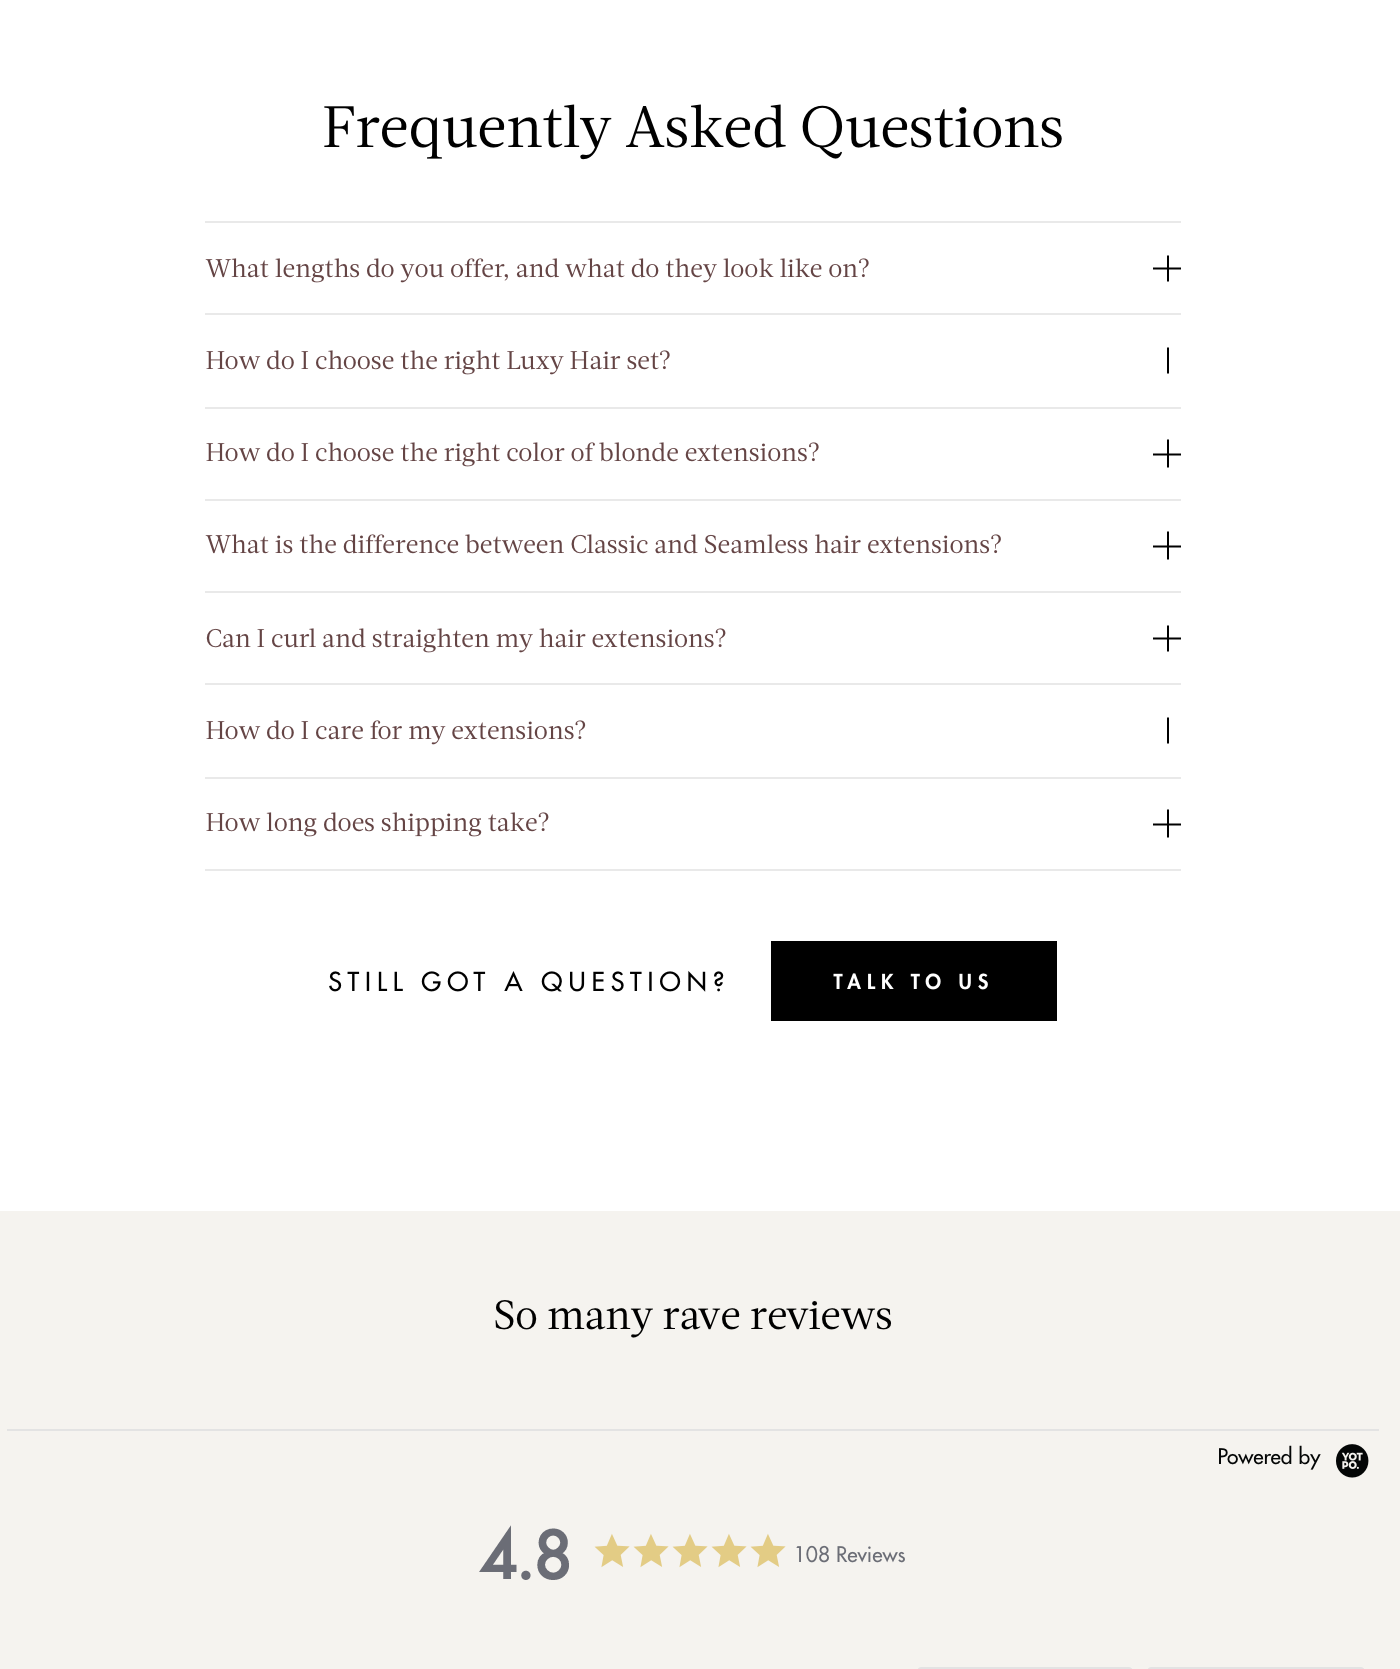 Luxy Hair - Frequently asked questions ecommerce example